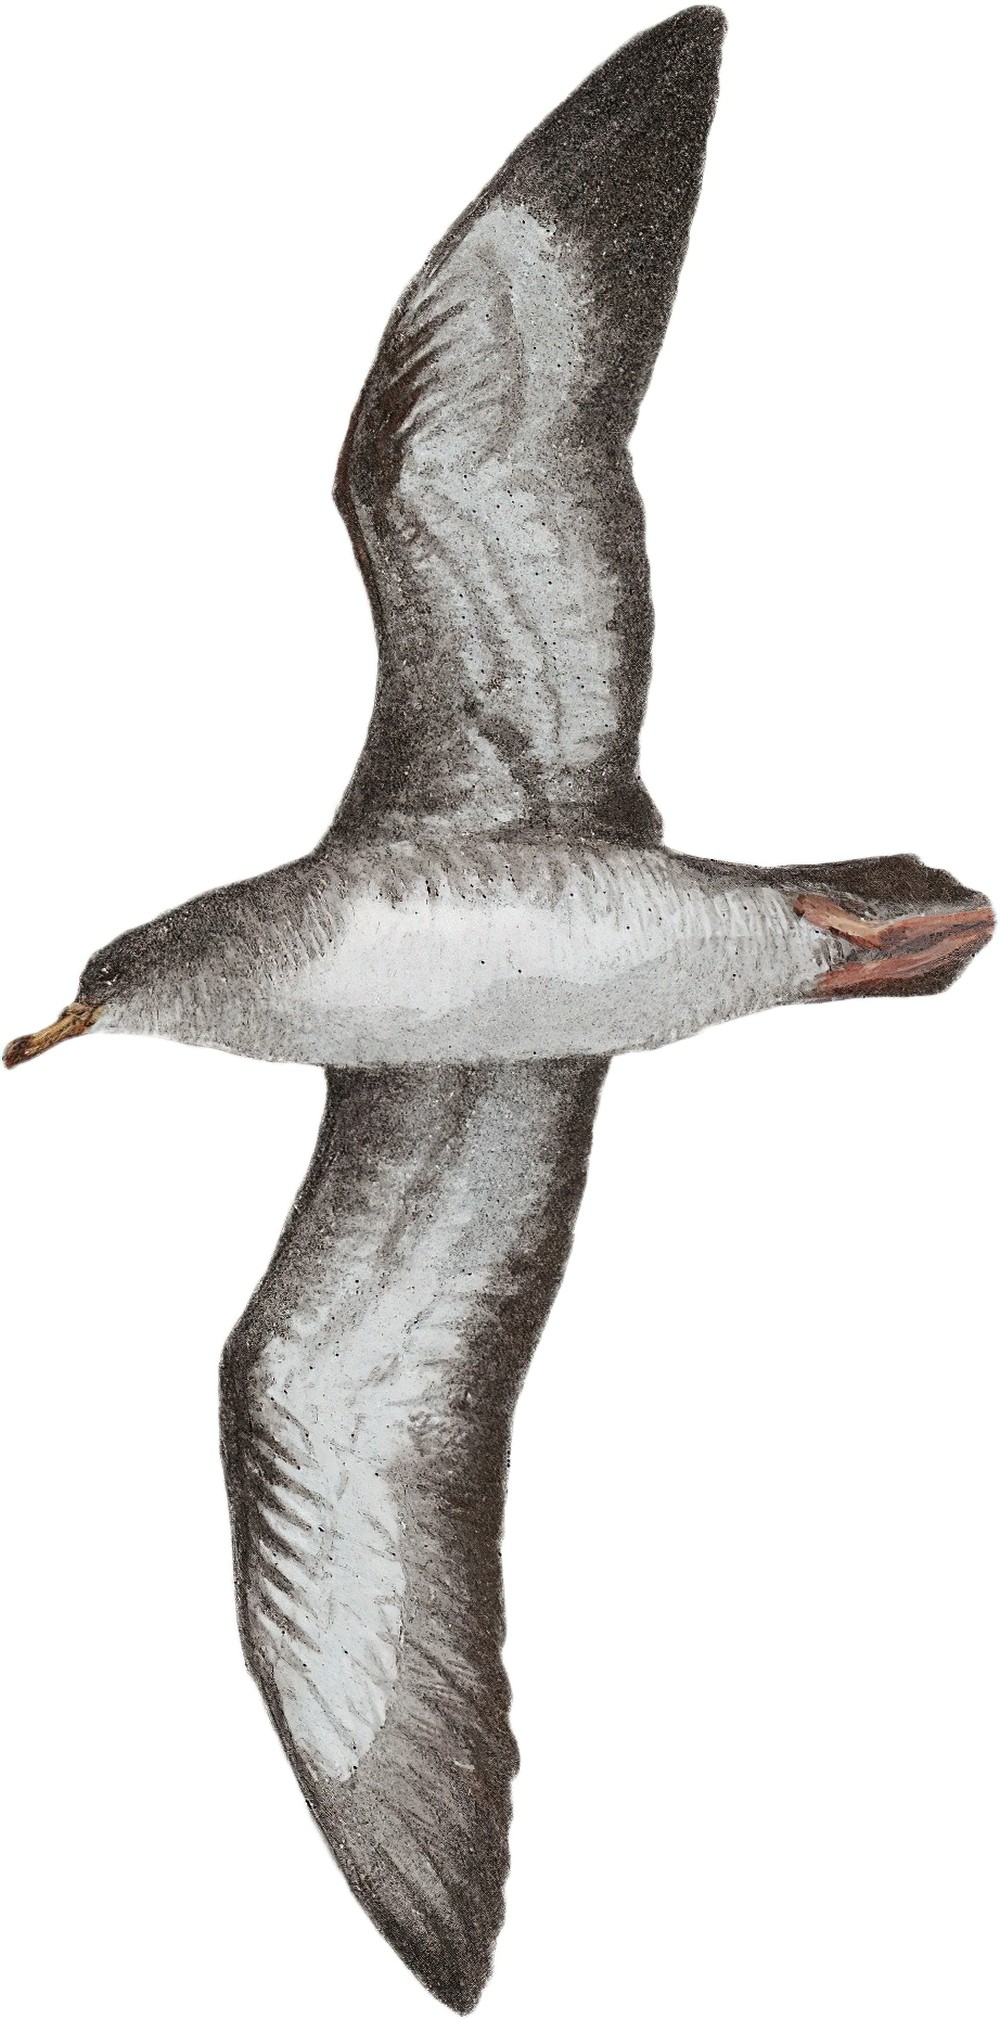 Pink-footed Shearwater / Ardenna creatopus